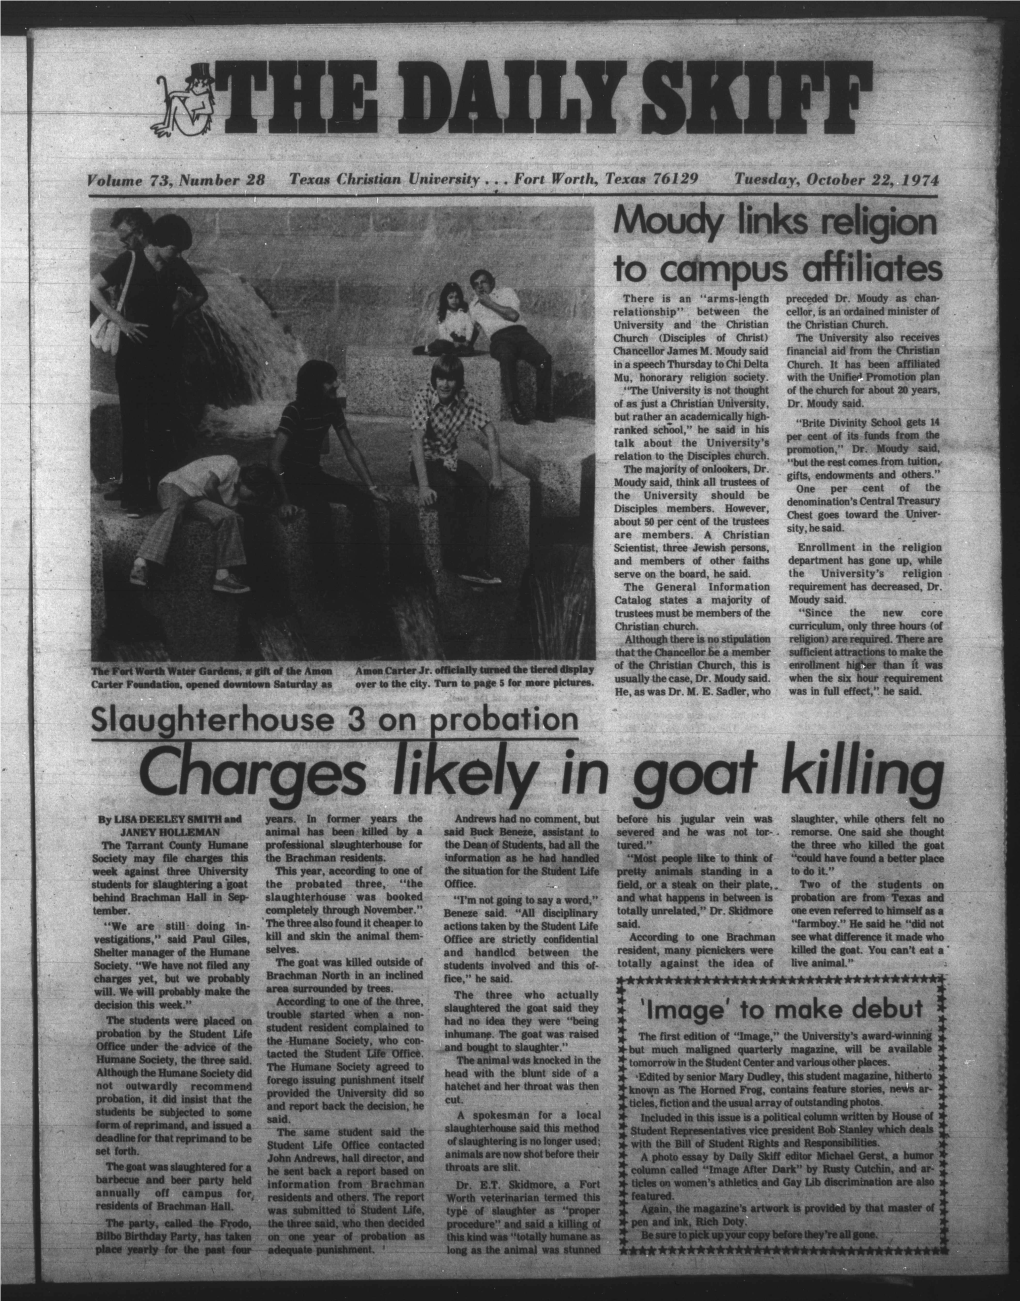 Charges Likely in Goat Killing by LISA DEELEY SMITH and Years